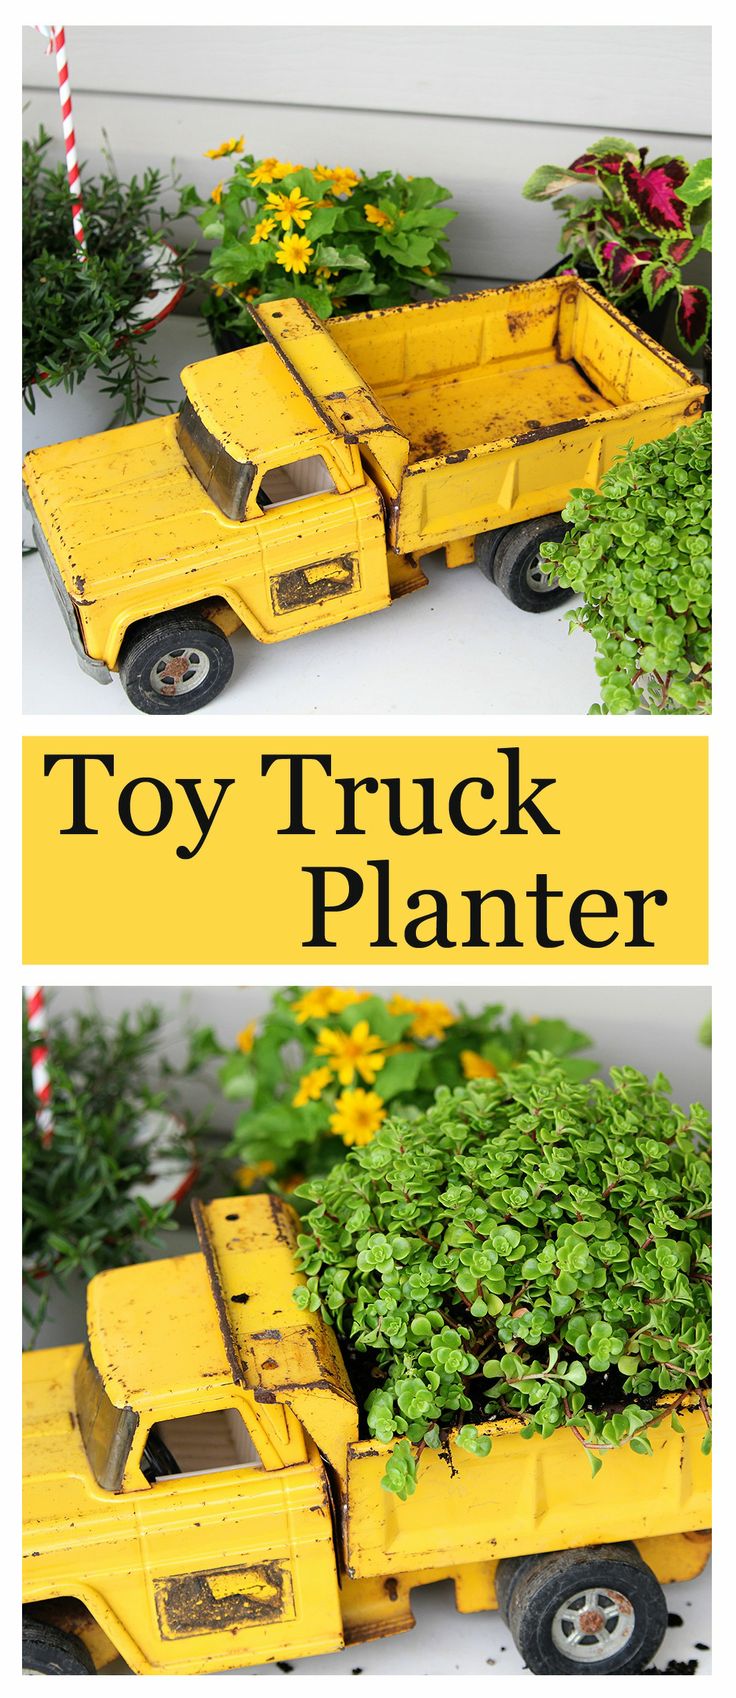 Using a toy truck, found at a yard sale, as a planter.